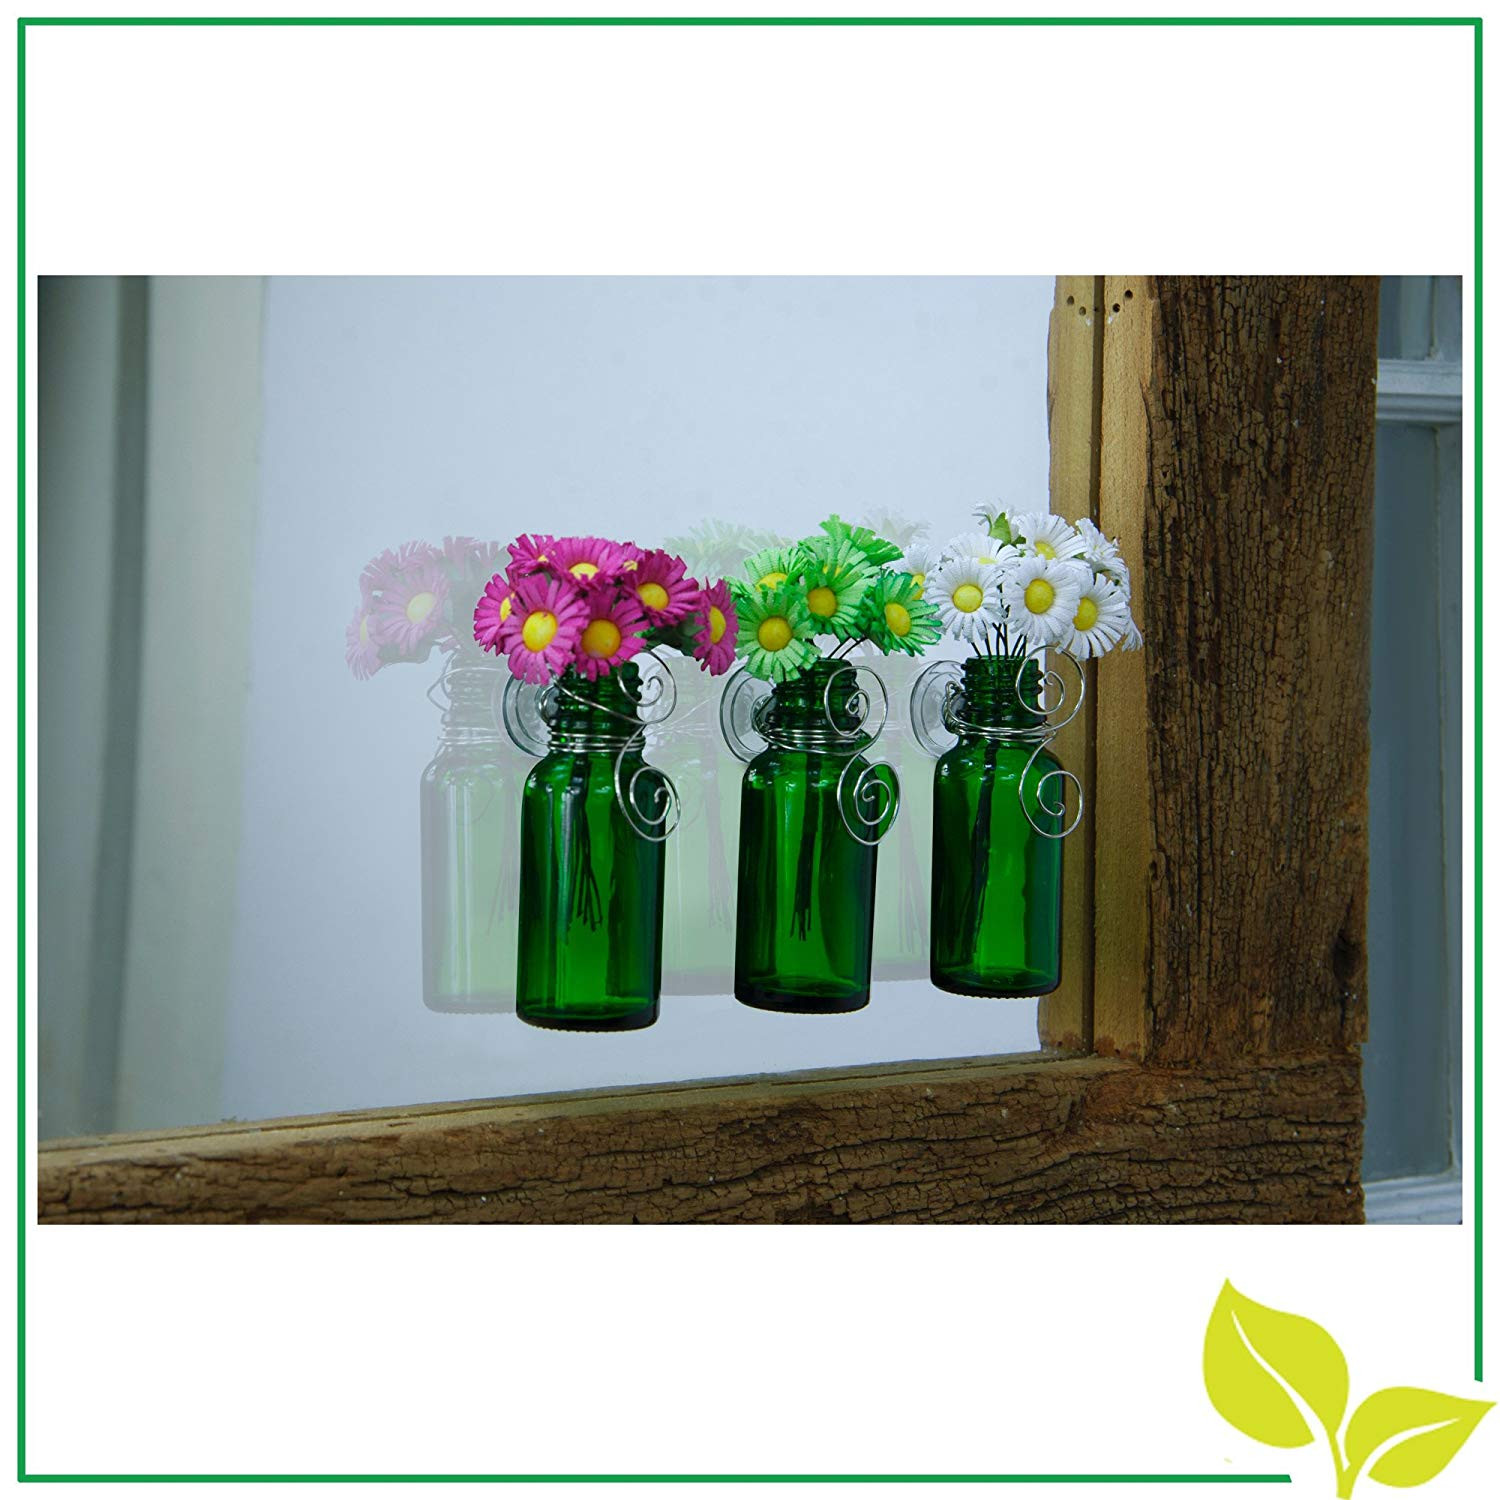 12 Nice Mini Glass Flower Vases 2024 free download mini glass flower vases of amazon com vazzini mini vase bouquet suction cup bud bottle intended for amazon com vazzini mini vase bouquet suction cup bud bottle holder with flowers decorative